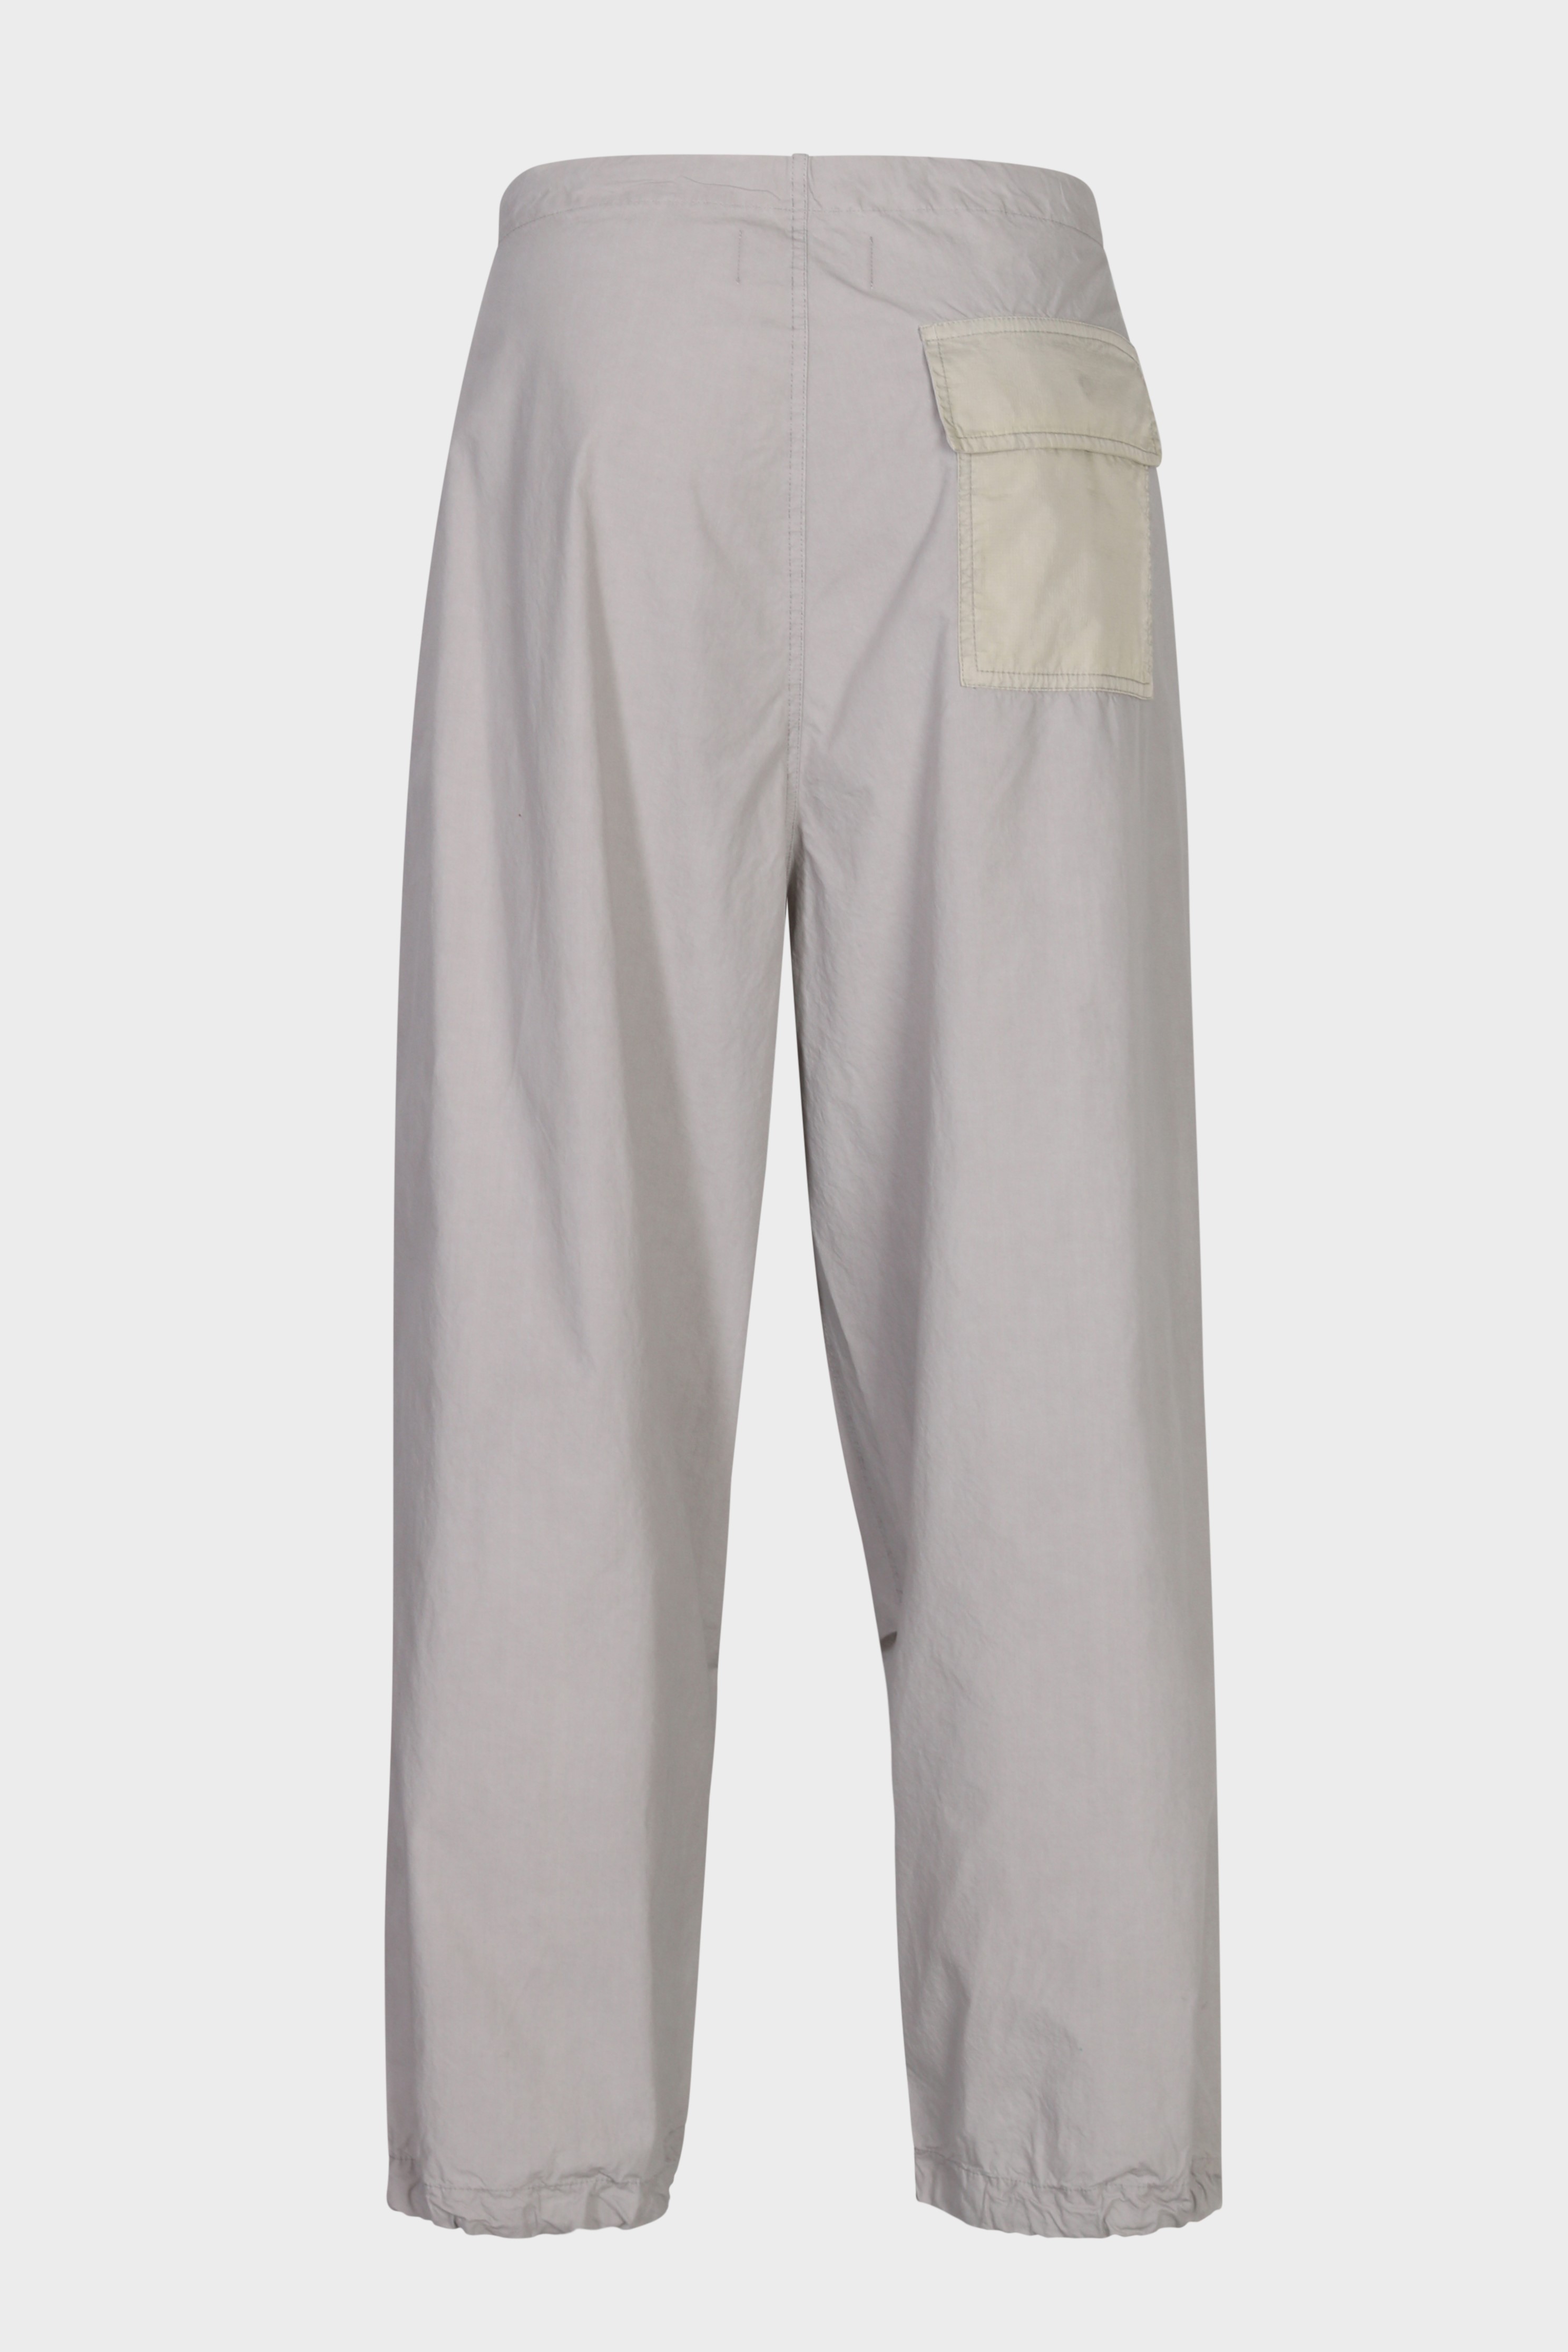 AUTRY ACTION PEOPLE Track Pant in Grey L